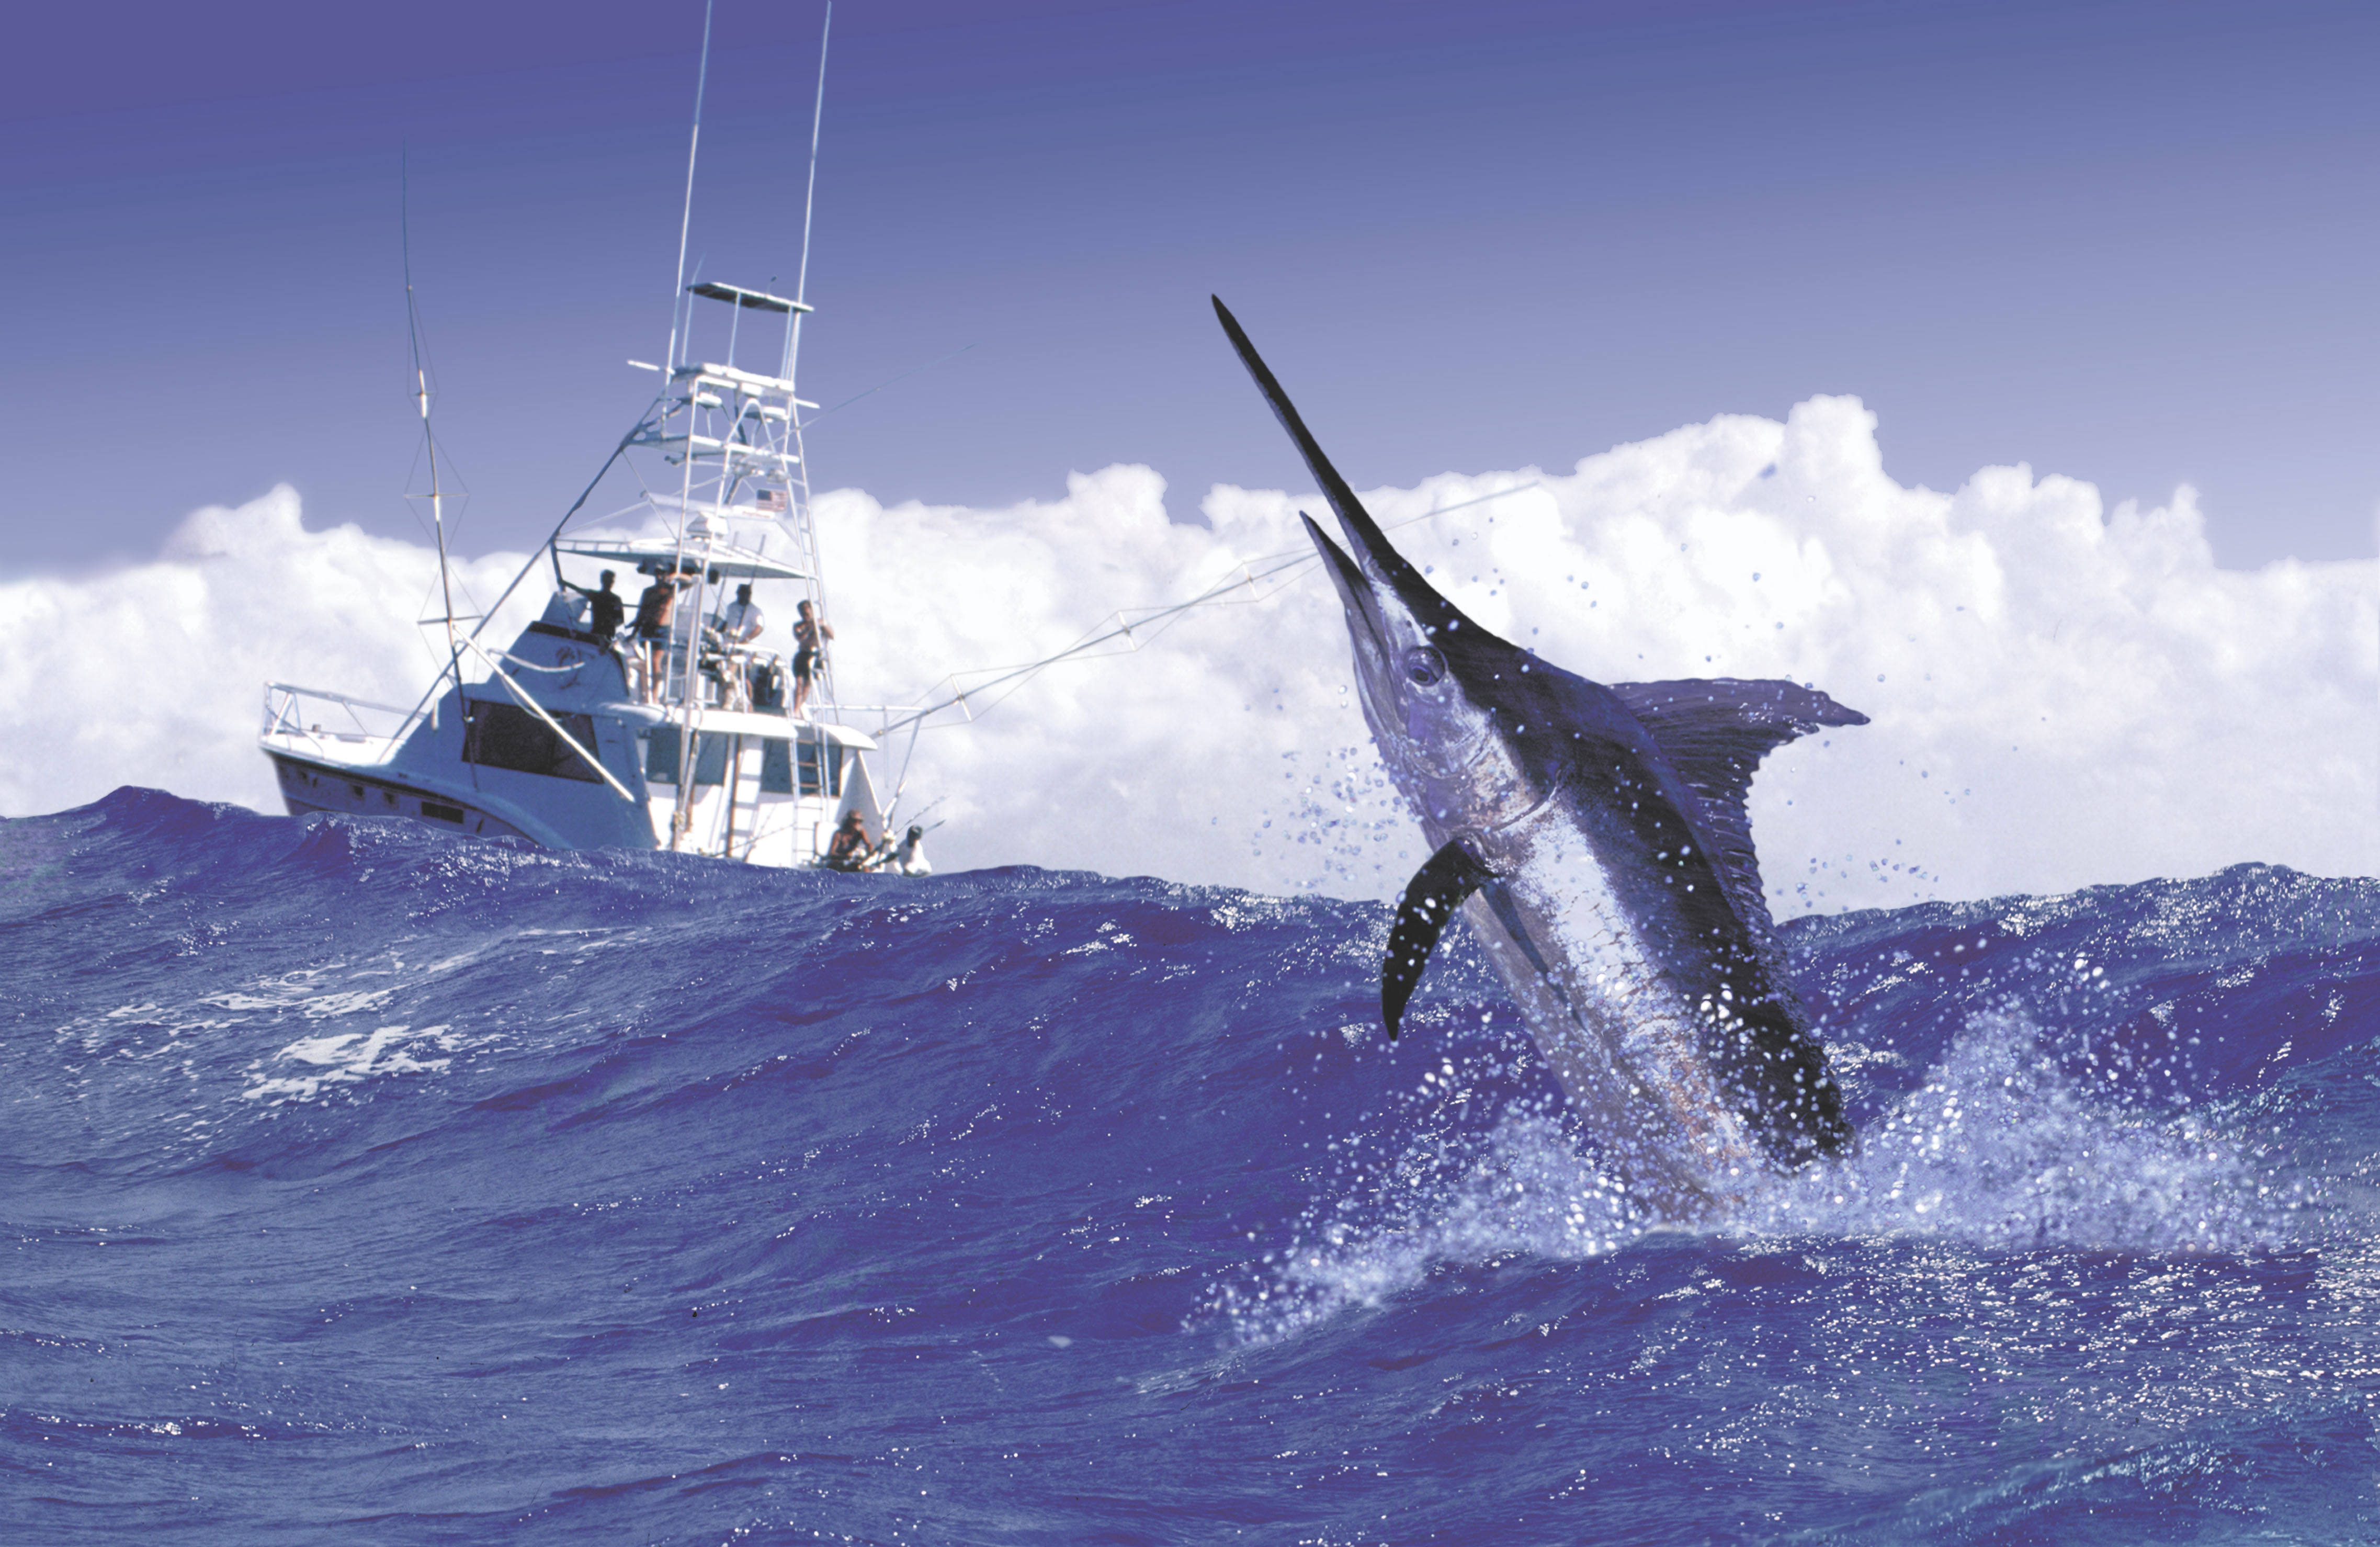 Blue marlin jumping out of the water as a group of fisherman watch from a recreational fishing boat in Costa Rica